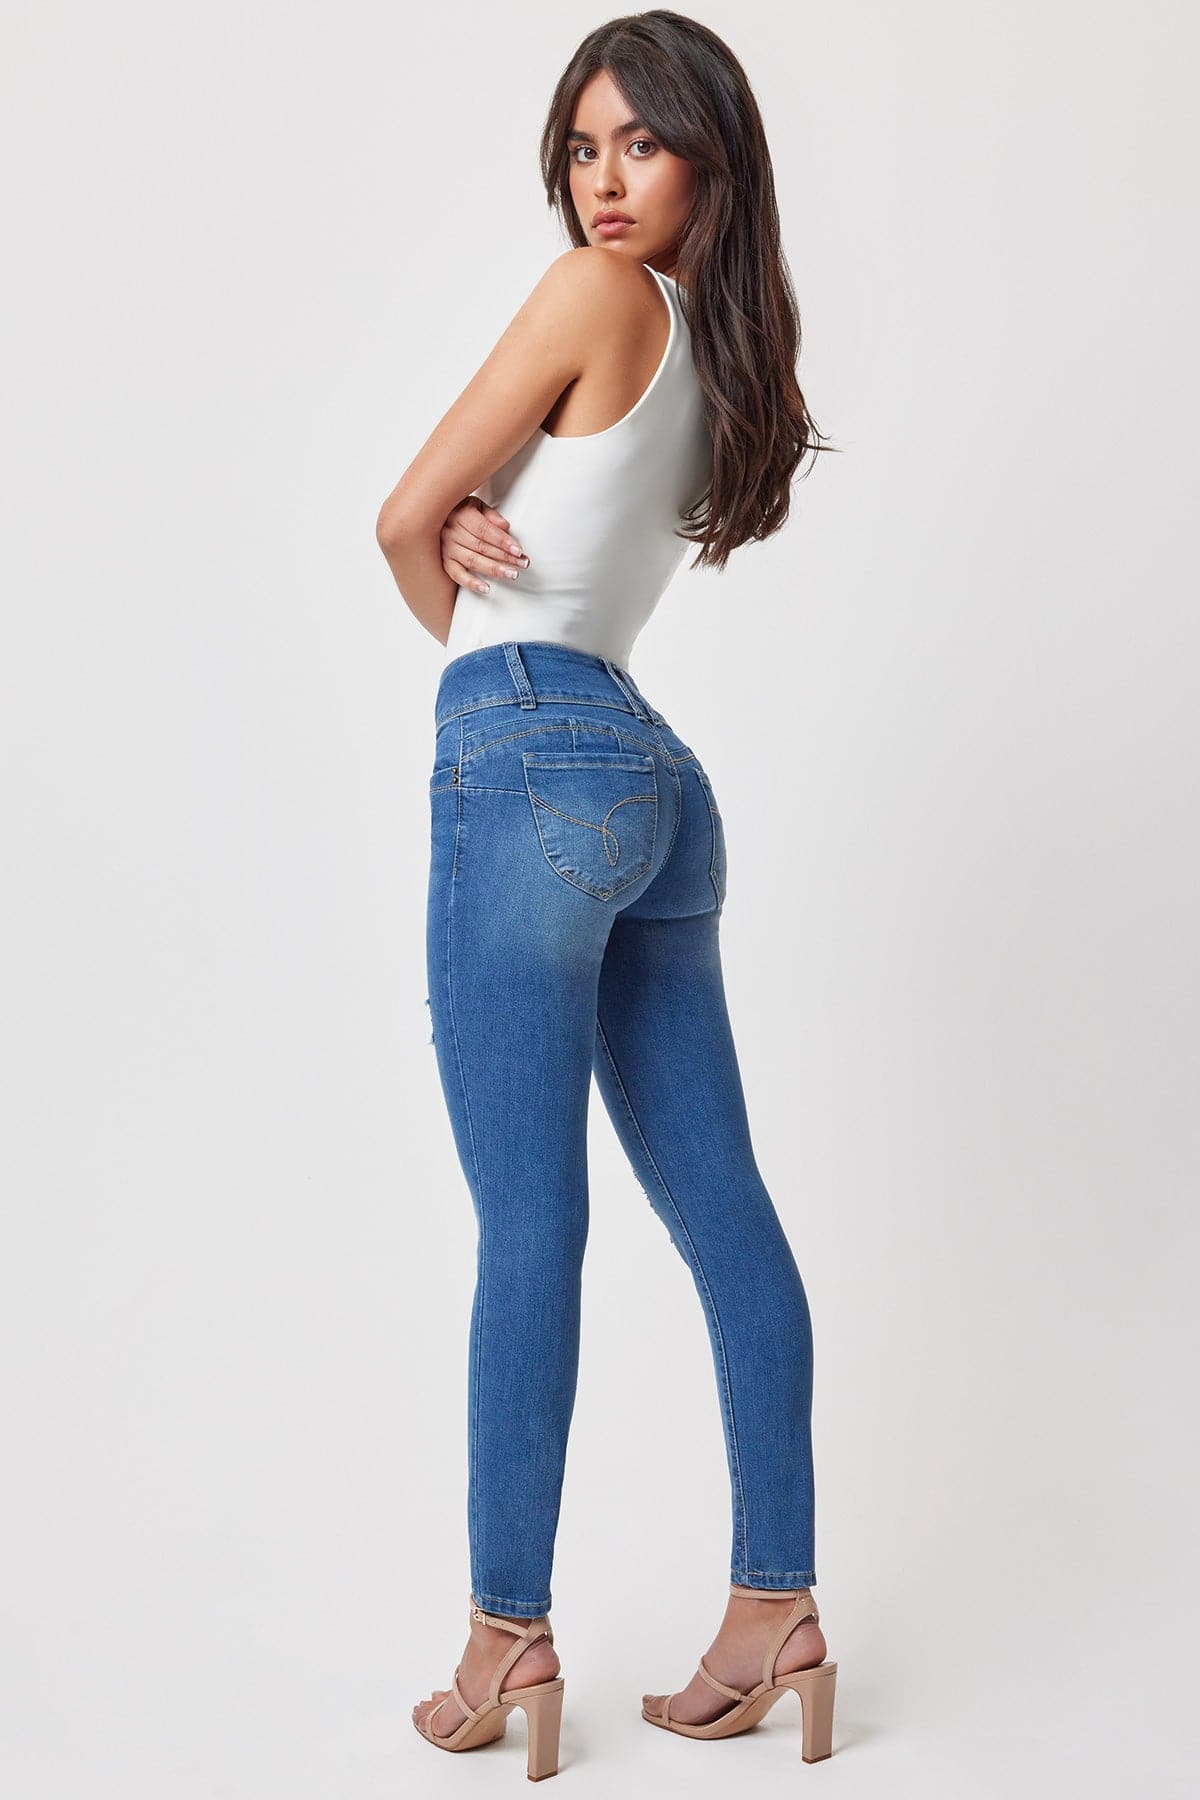 Royalty for Me by YMI Jeans Recycled Fibers Wannabettabutt Cuffed Stretchy  Casual Mid-Rise Denim Fitted Skinny Petite Jeans for Women (Medium wash  Denim,4), Medium Wash Denim, 4 : : Clothing, Shoes 